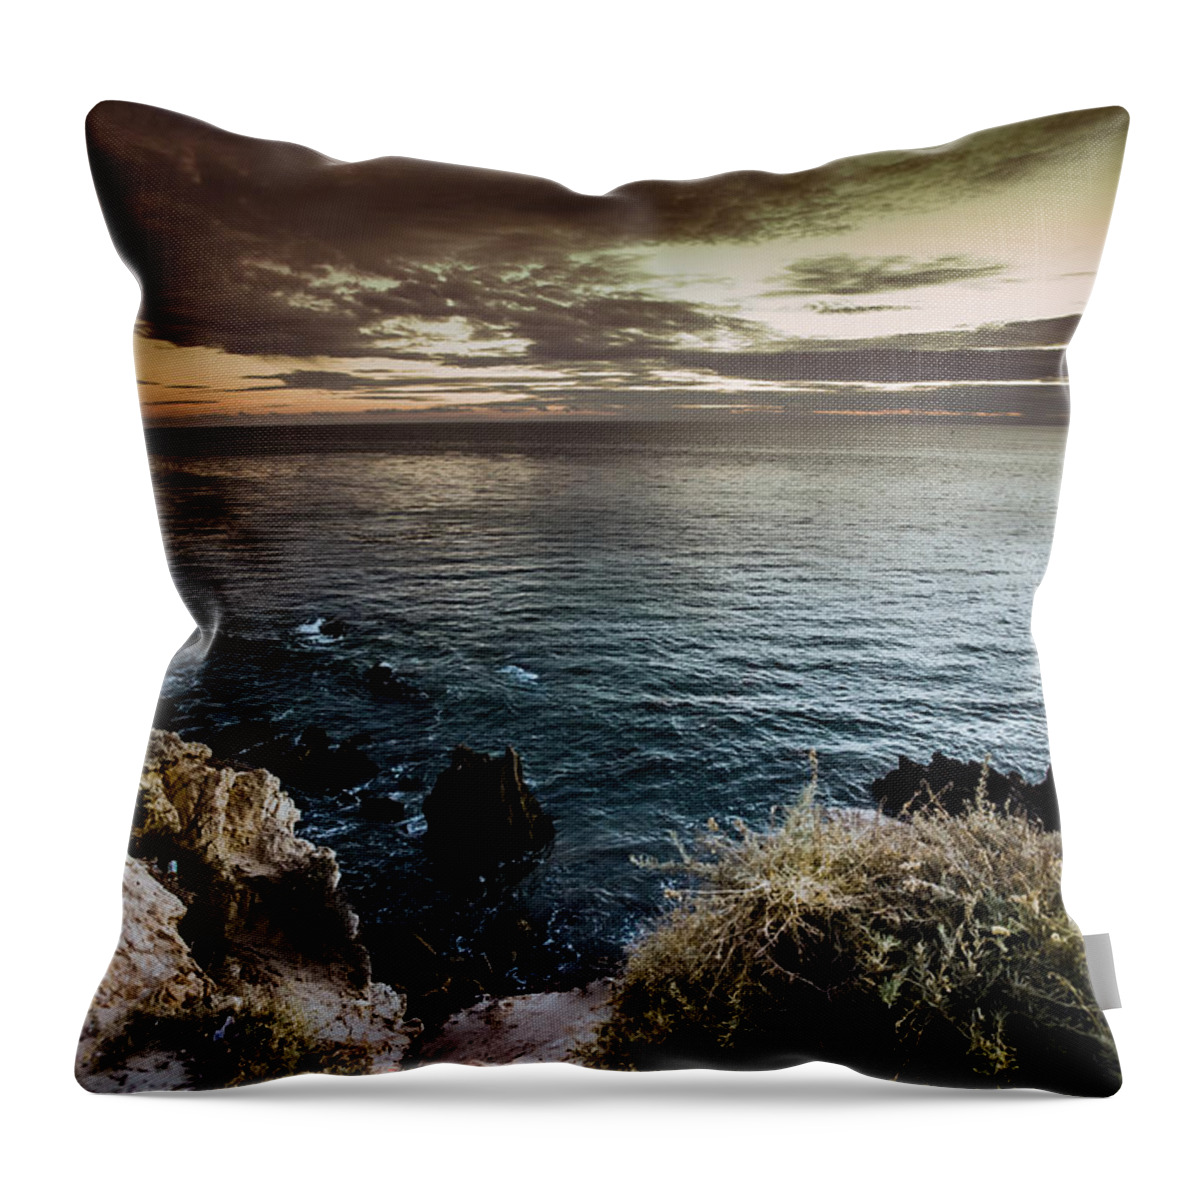  Fine Art Print For Sale Throw Pillow featuring the photograph Cold evening on the ocean by Sviatlana Kandybovich